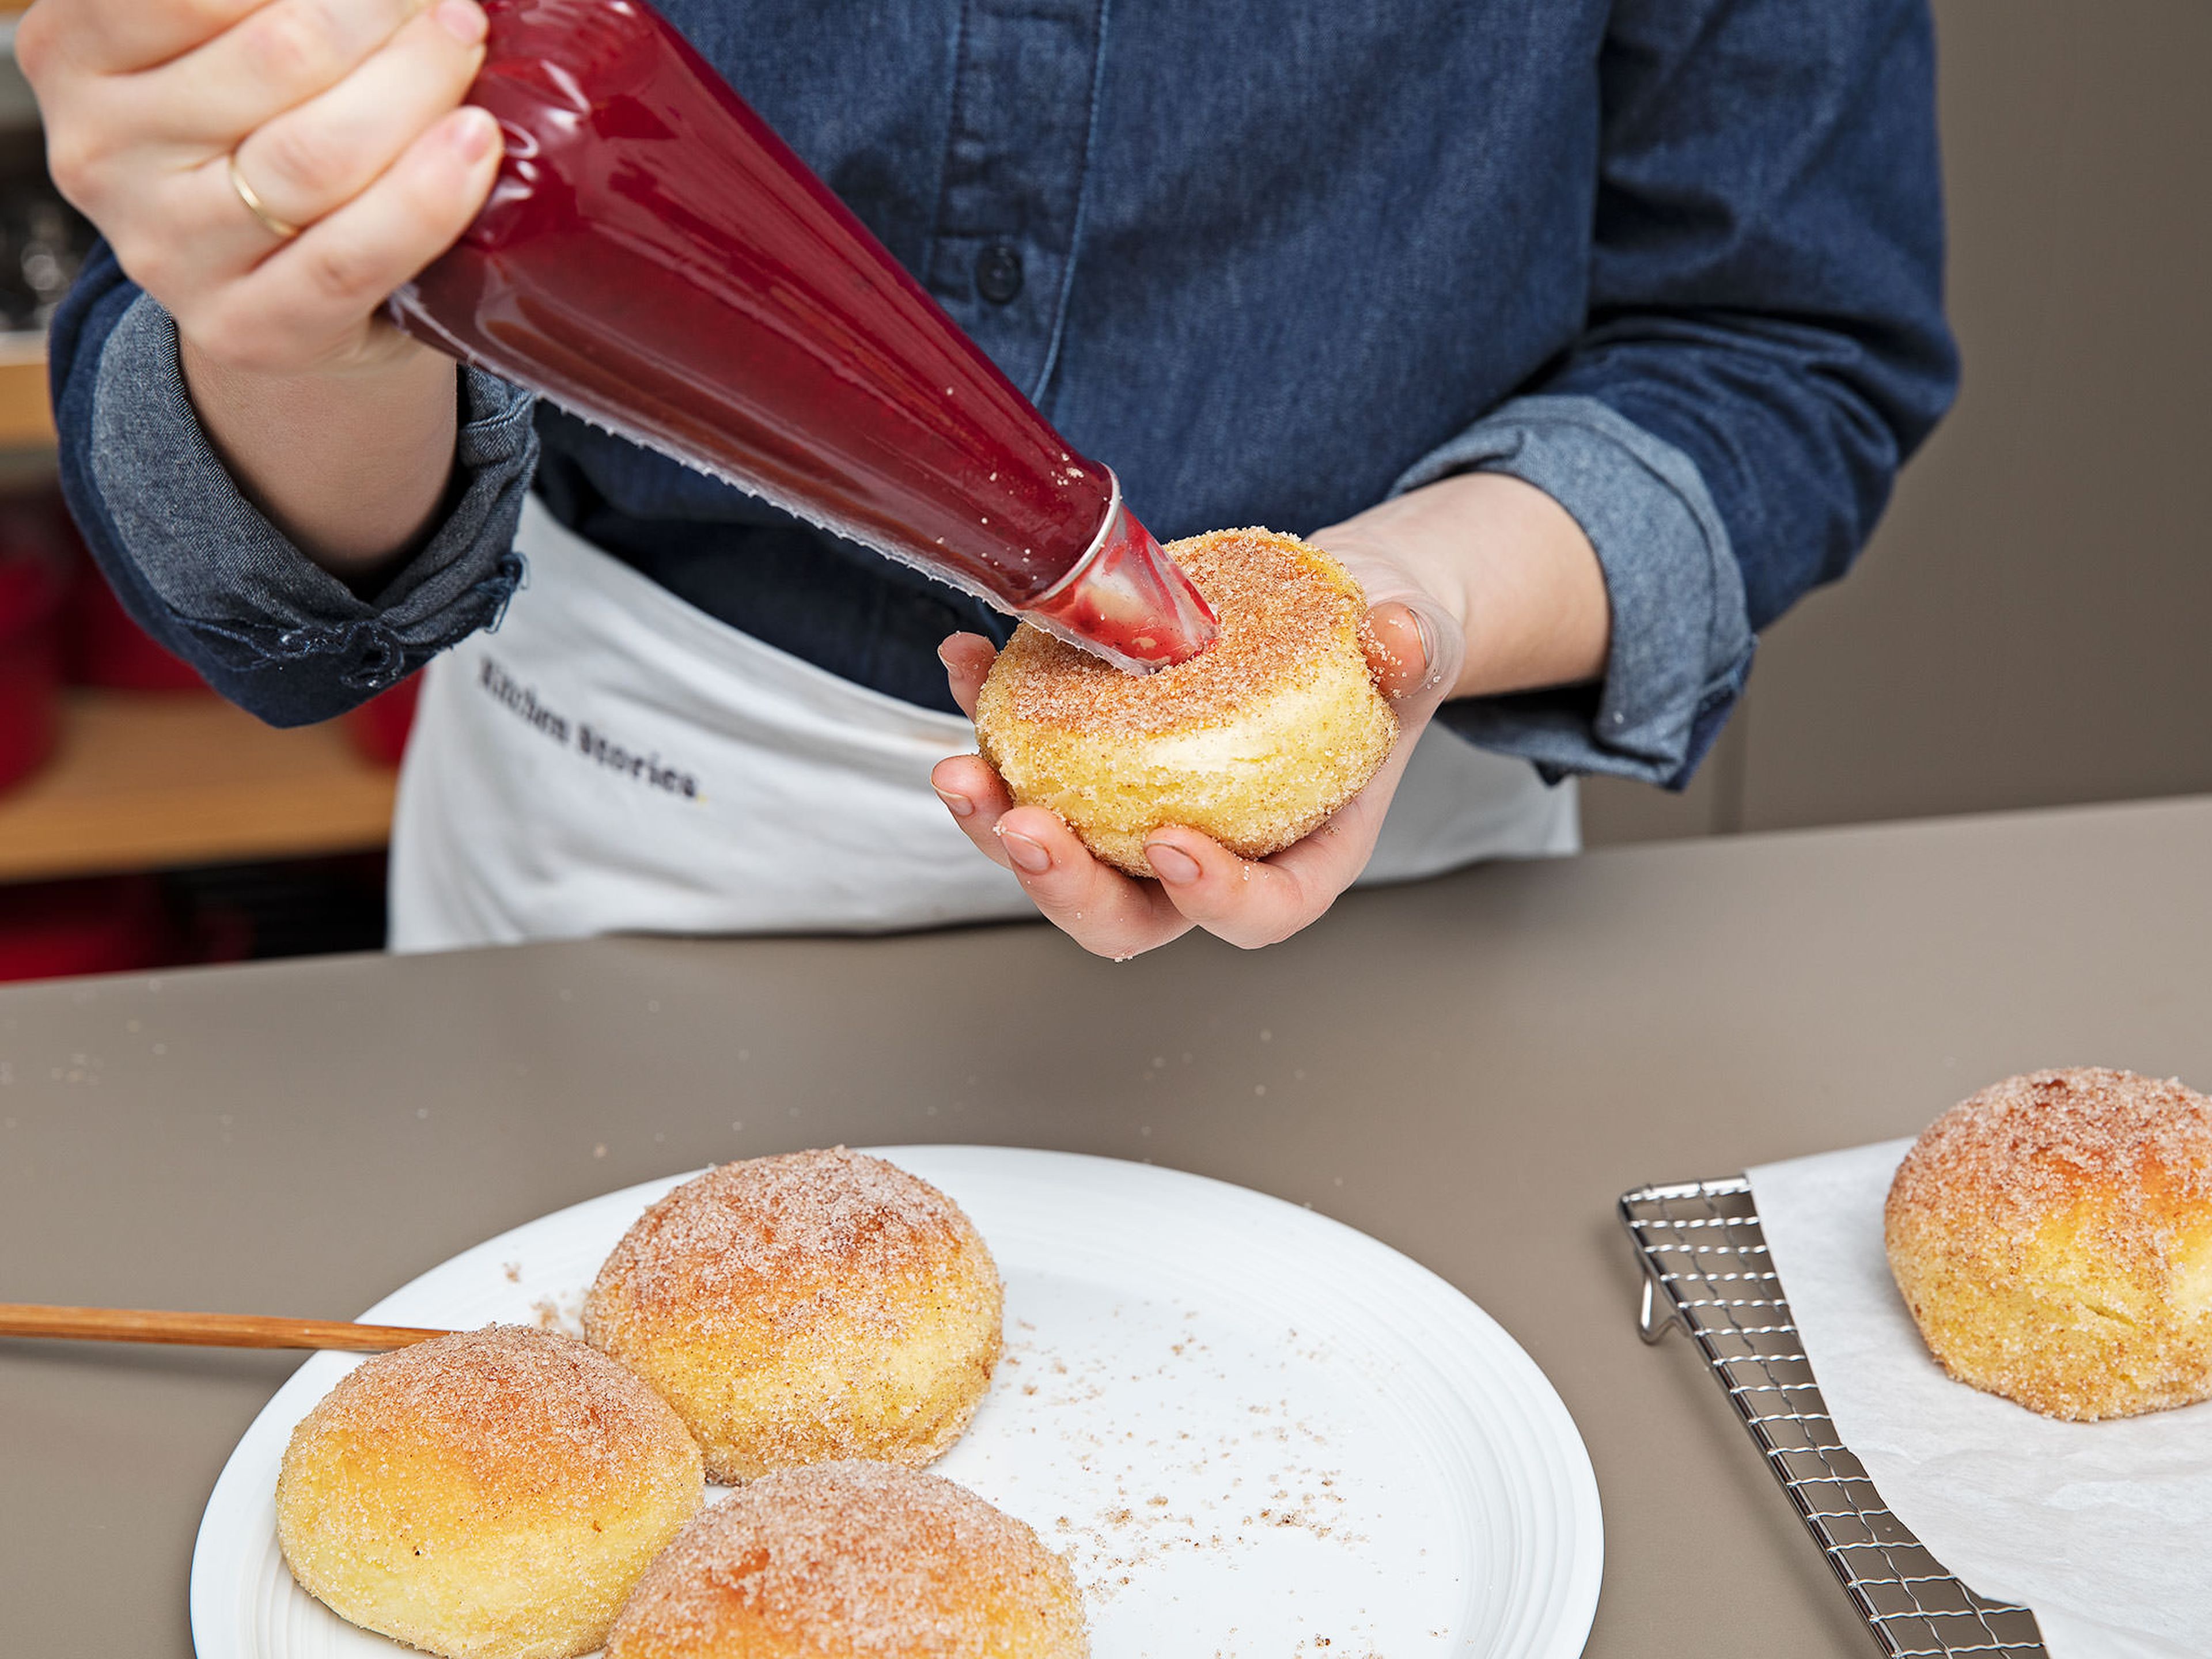 Fill a piping bag fitted with a tip with the cranberry sauce. With a small knife, cut an X into the bottom of the doughnut, halfway into the donut. Fill this cavity with jam, leaving a little dollop on the surface. Enjoy!